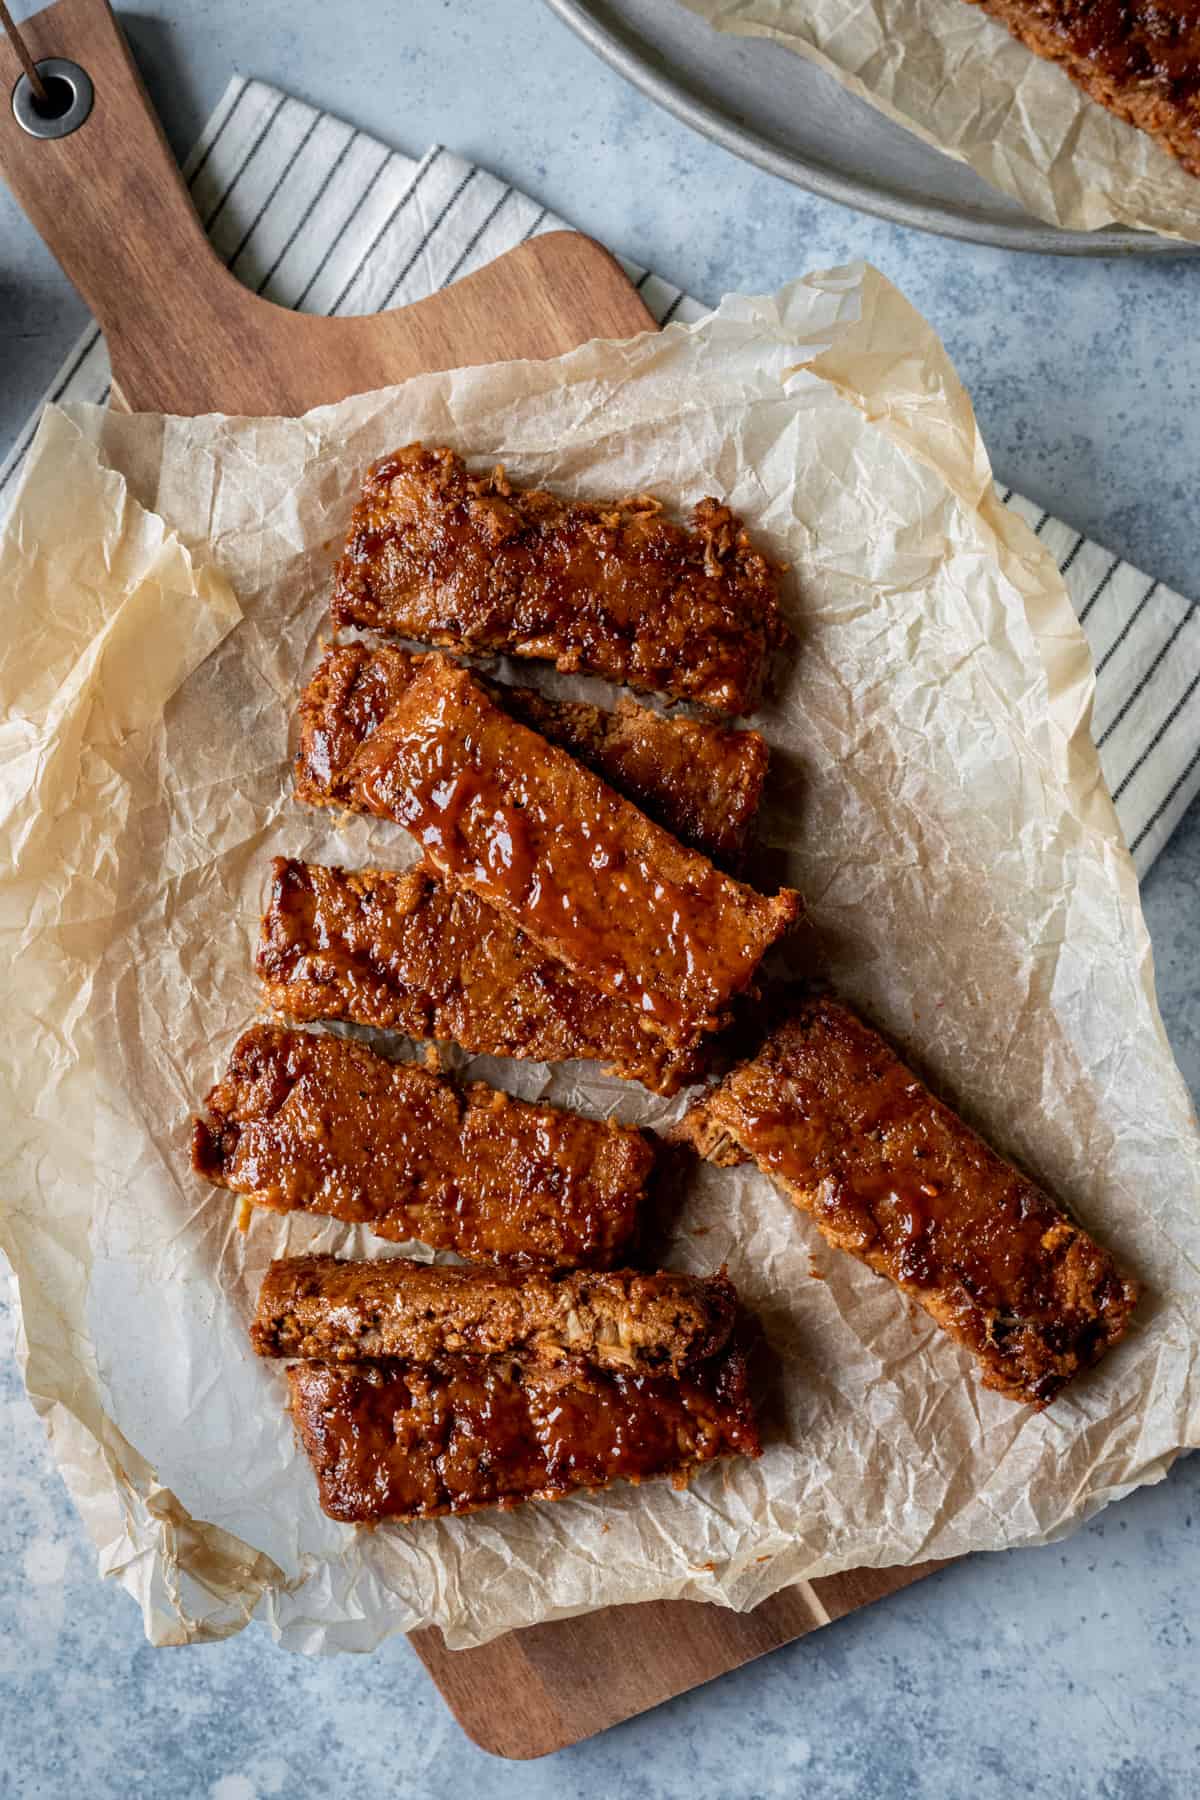 Baked seitan ribs slathered with barbecue sauce on a cutting board.